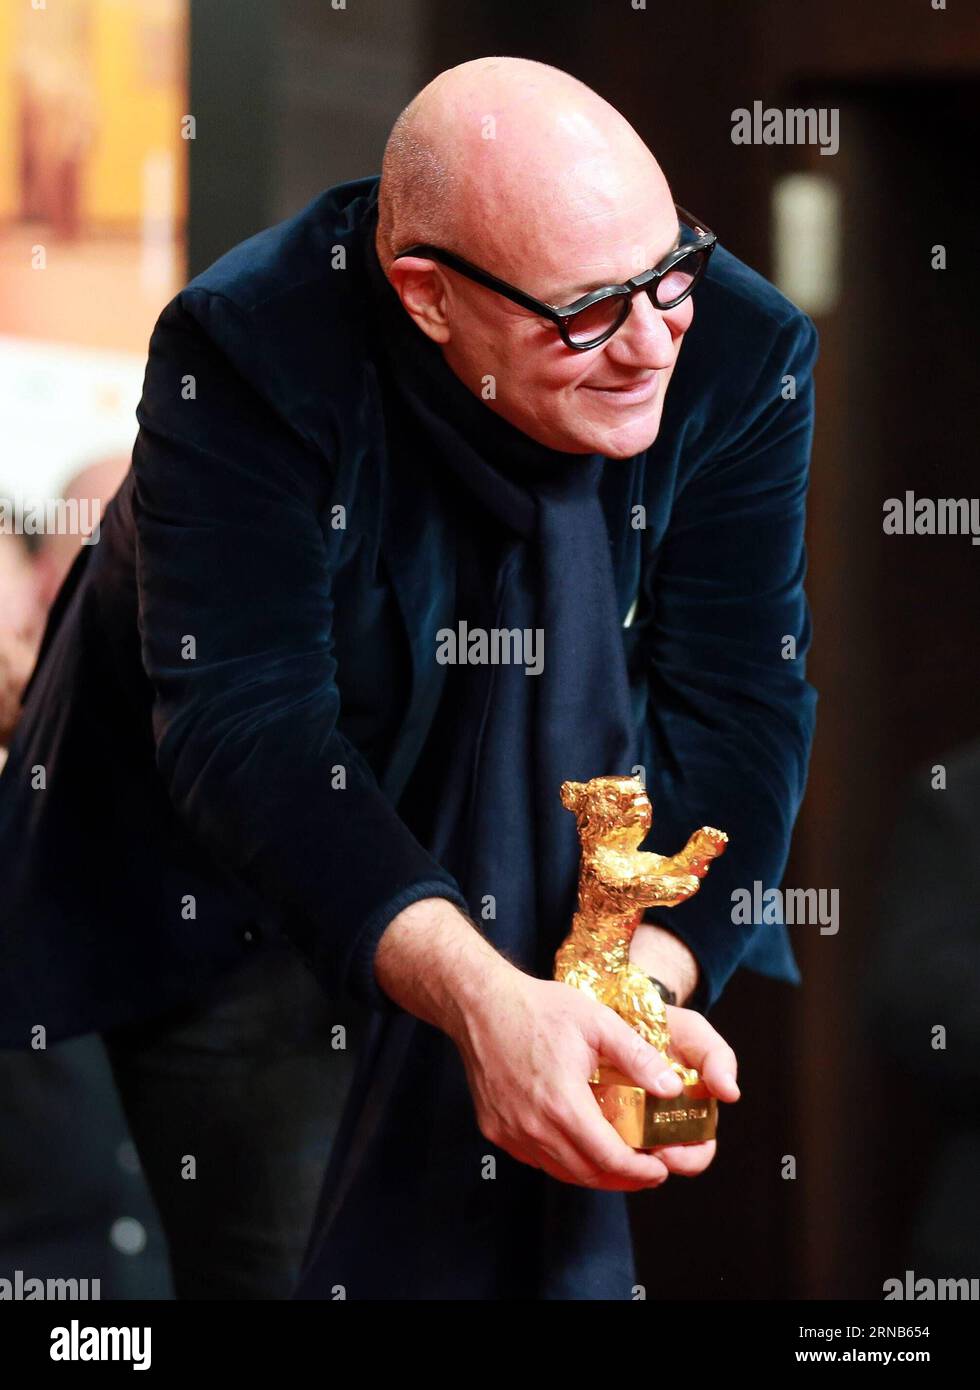 (160220) -- BERLIN, Feb. 20, 2016 -- Italian director Gianfranco Rosi attends a press conference with the trophy of Golden Bear for Best Film after the awards ceremony of the 66th Berlinale International Film Festival in Berlin, Germany, Feb. 20, 2016. The Italian documentary film Fire at Sea won the Golden Bear, the top jury prize awarded to the best film, in the 66th Berlin International Film Festival on Saturday. ) GERMANY-BERLIN-BERLINALE INTERNATIONAL FILM FESTIVAL-AWARDS CEREMONY-GOLD BEAR-GIANFRANCO ROSI LuoxHuanhuan PUBLICATIONxNOTxINxCHN   Berlin Feb 20 2016 Italian Director Gian Fran Stock Photo